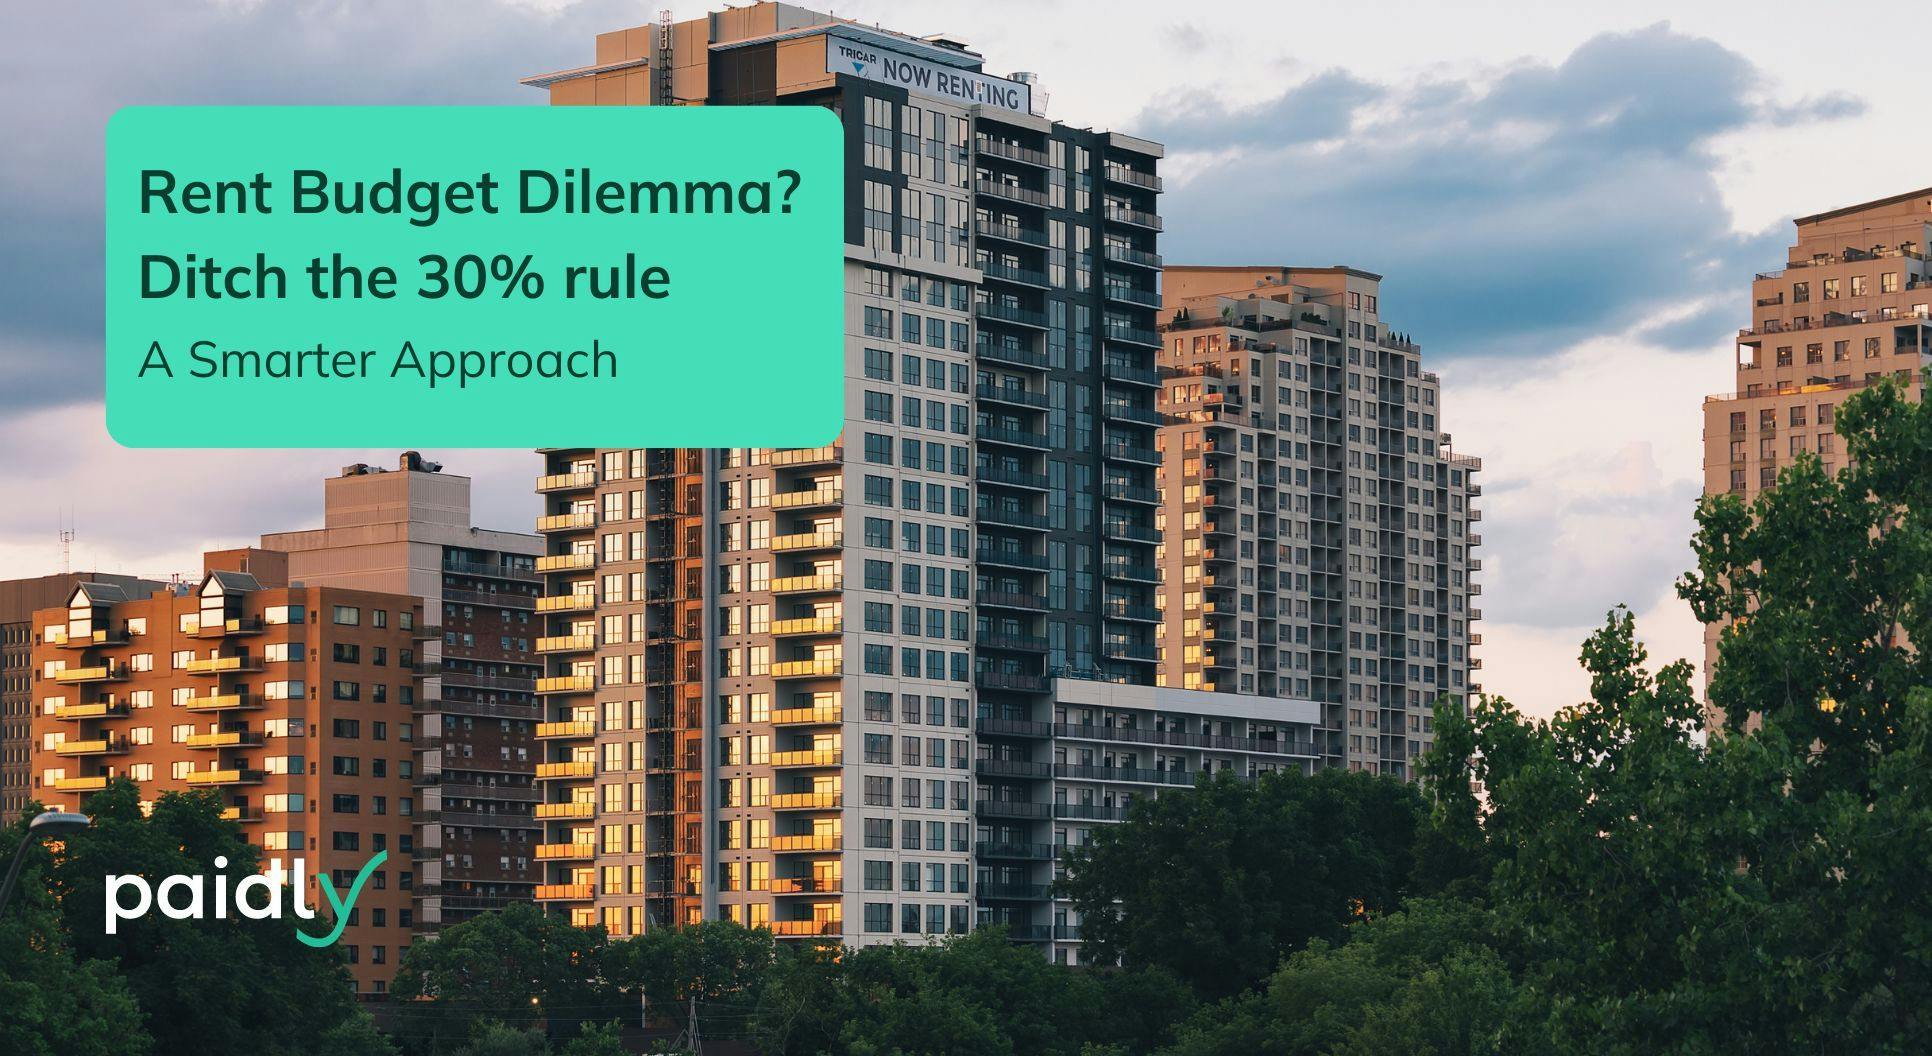 Apartments - Rent Budget Dilemma? Ditch the 30% Rule - A Smarter Approach